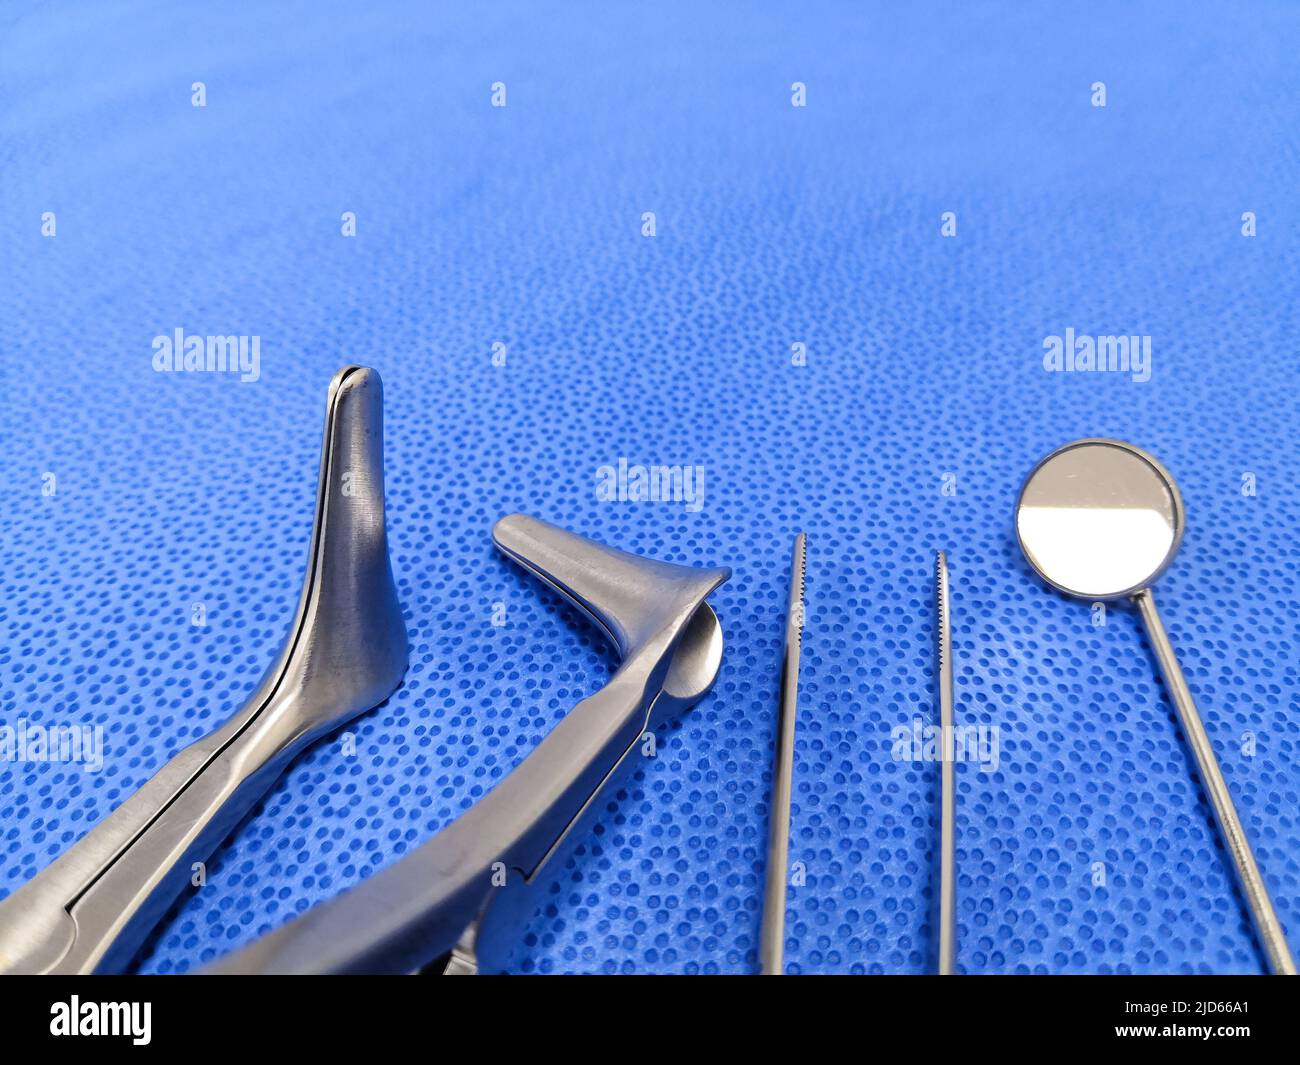 Closeup Image Of Arranged ENT Surgical Instruments In Operation Room Stock Photo